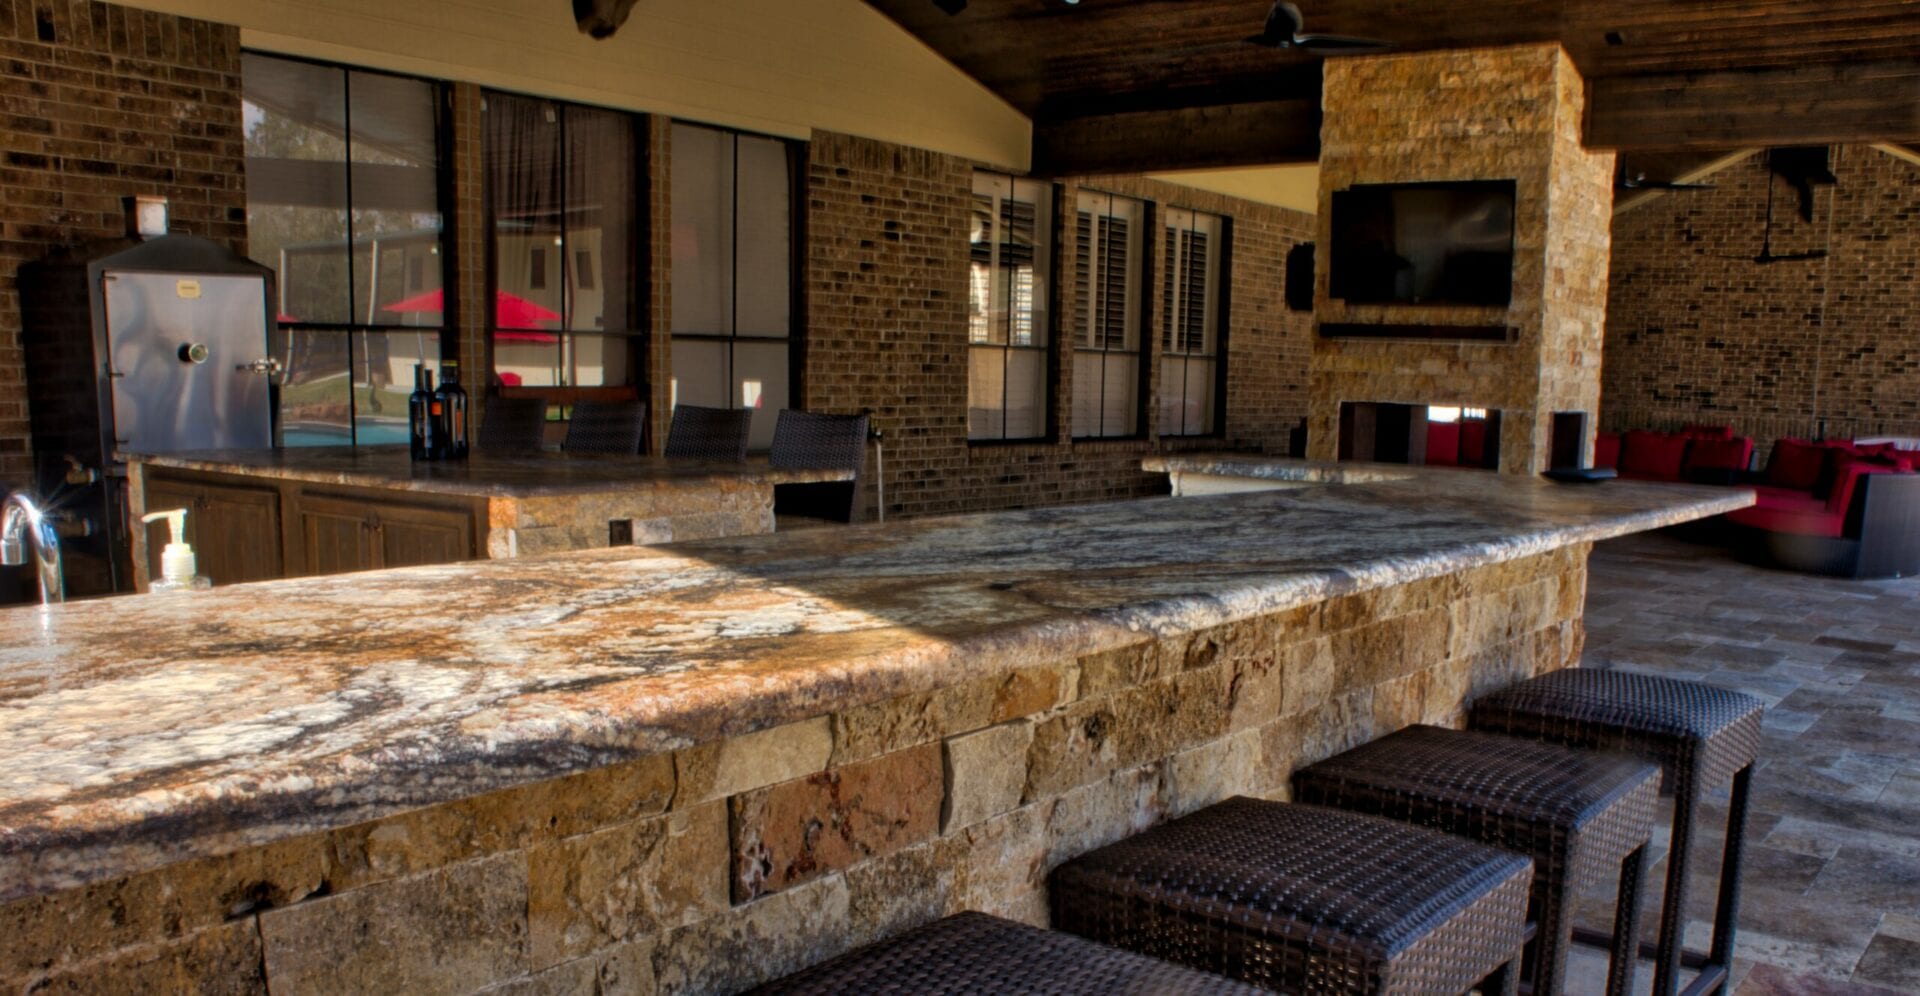 A stone bar with seating and television in the background.